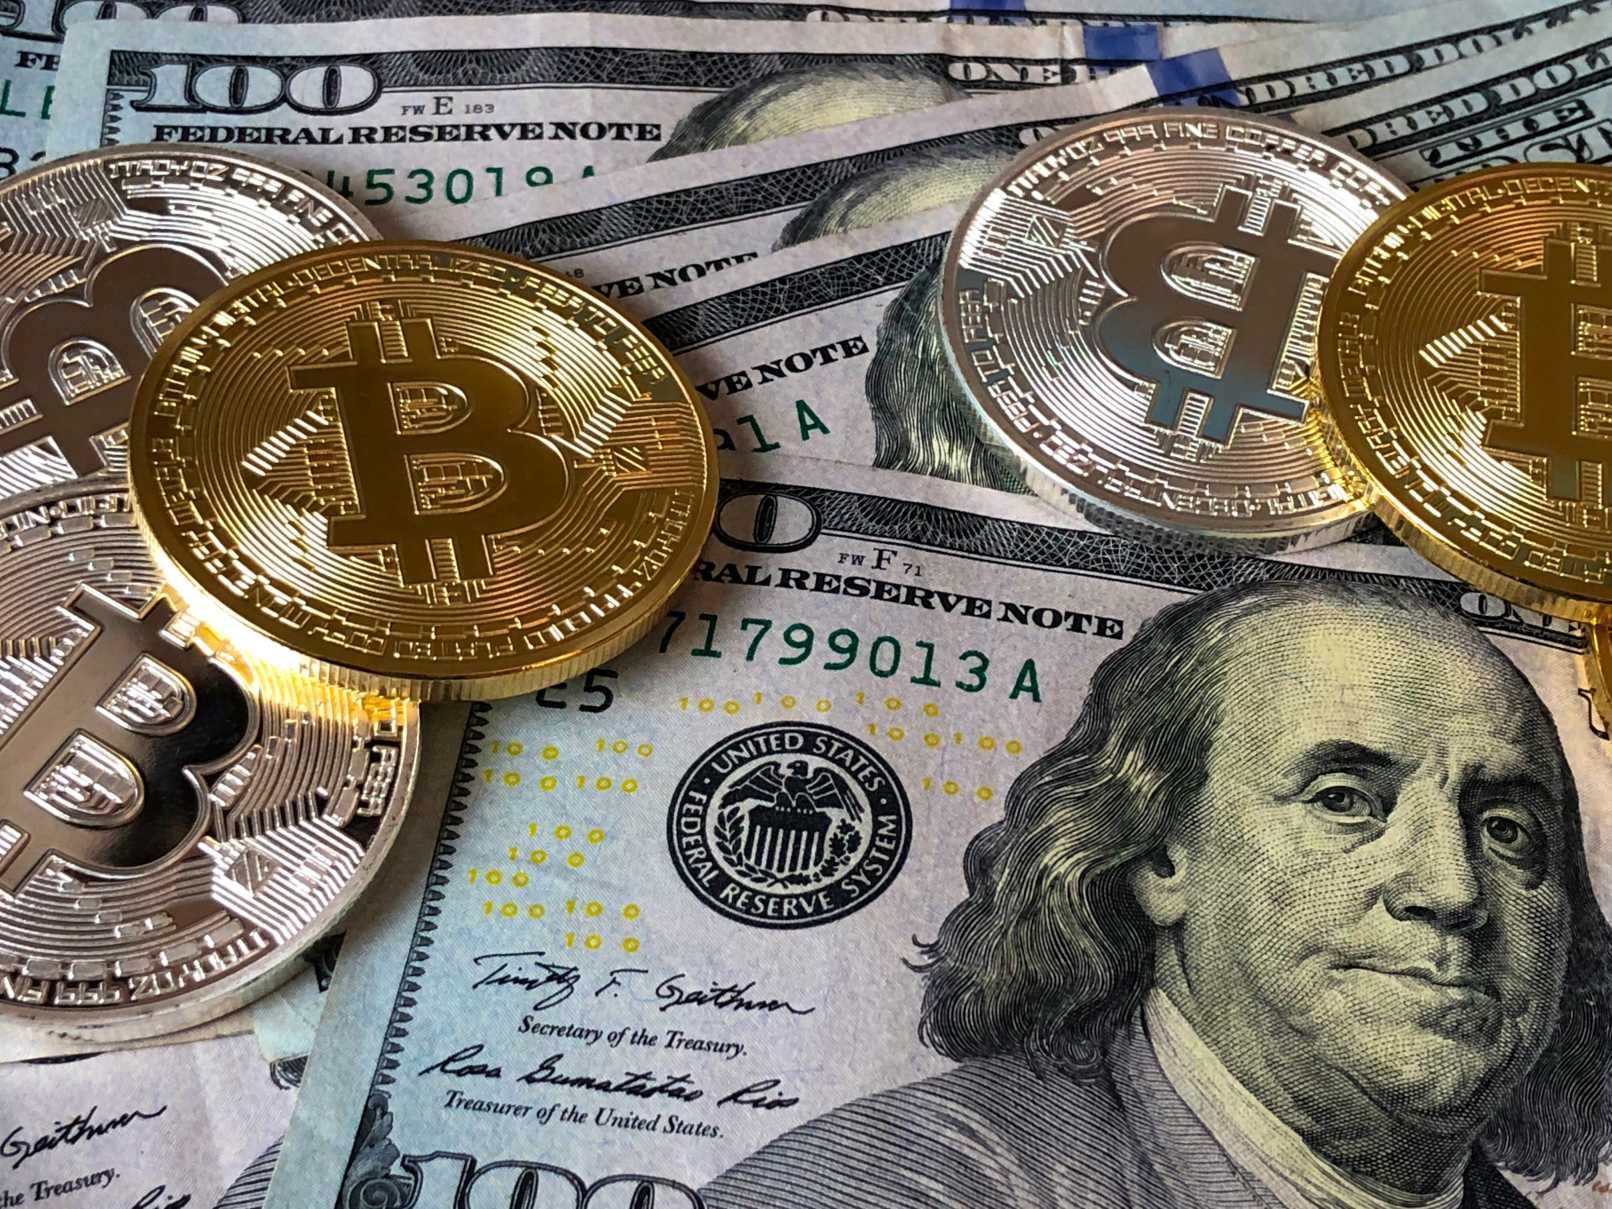 cryptos good for russia? Bitcoin can replace usd